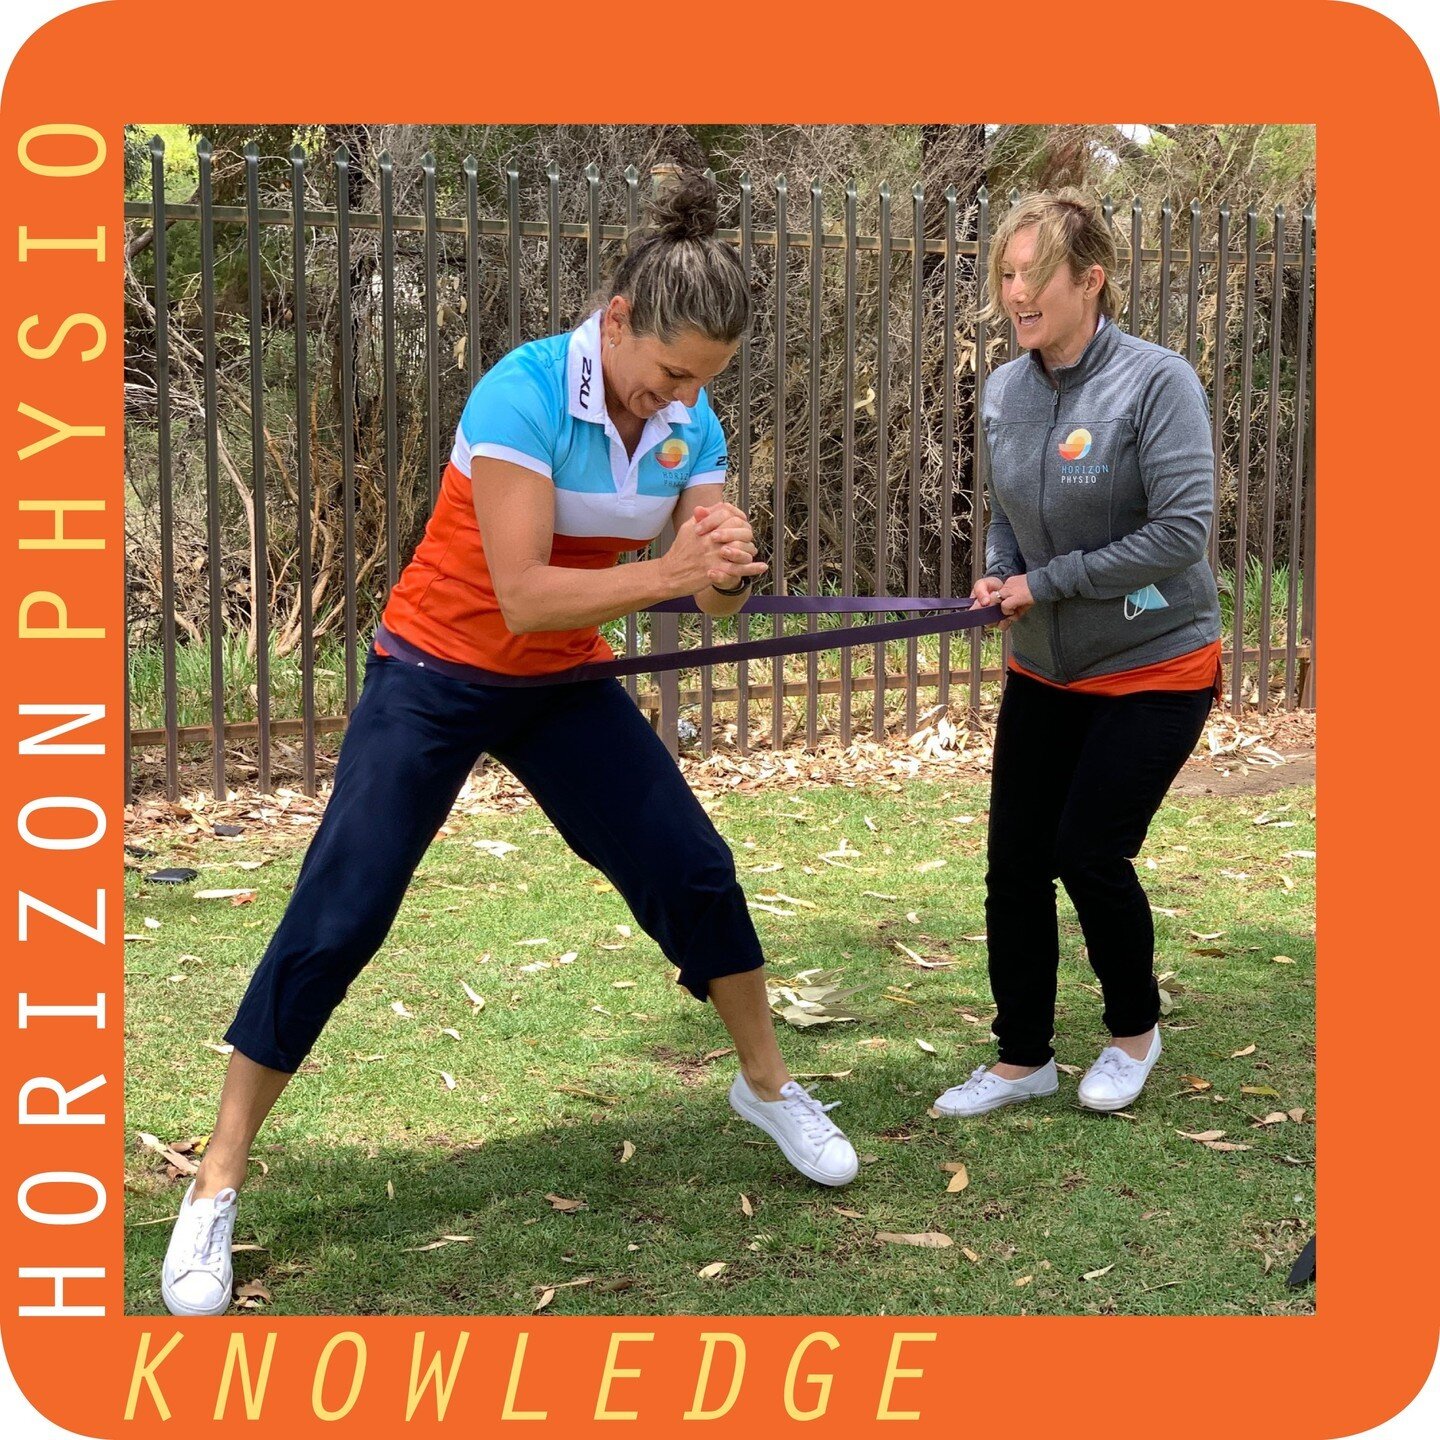 Great Education session this week on return to sports drills for change of directions sports - football, tennis, soccer, etc. Banded exercises are great for working of knee stability and functional glut work. 
Have a sports injury? Bookings available